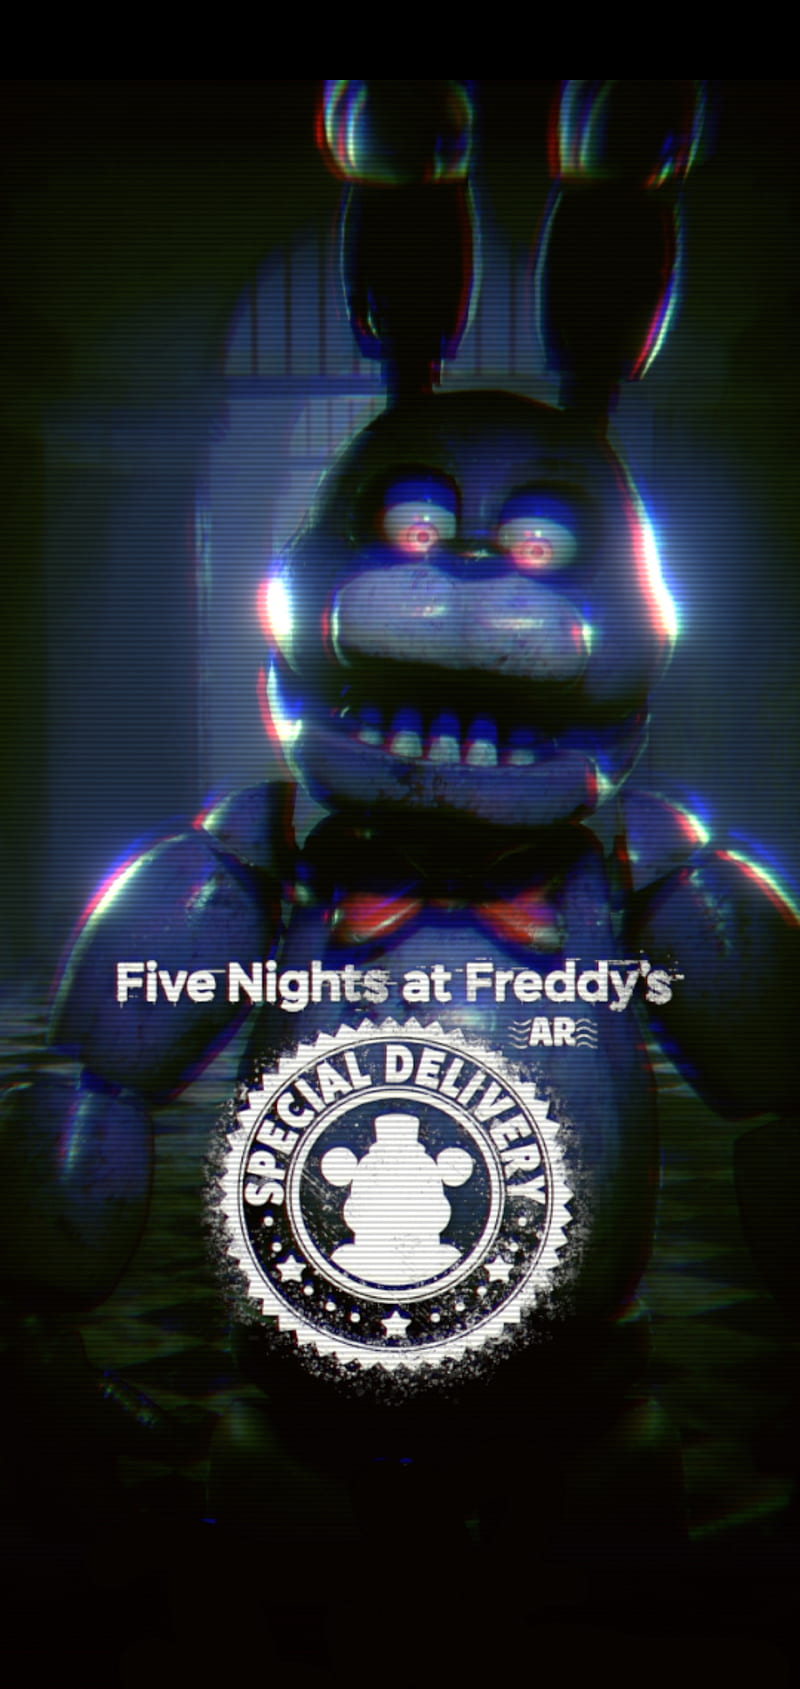 SD Bonnie, five nights at freddys, fnaf, mobile, special delivery, HD phone wallpaper